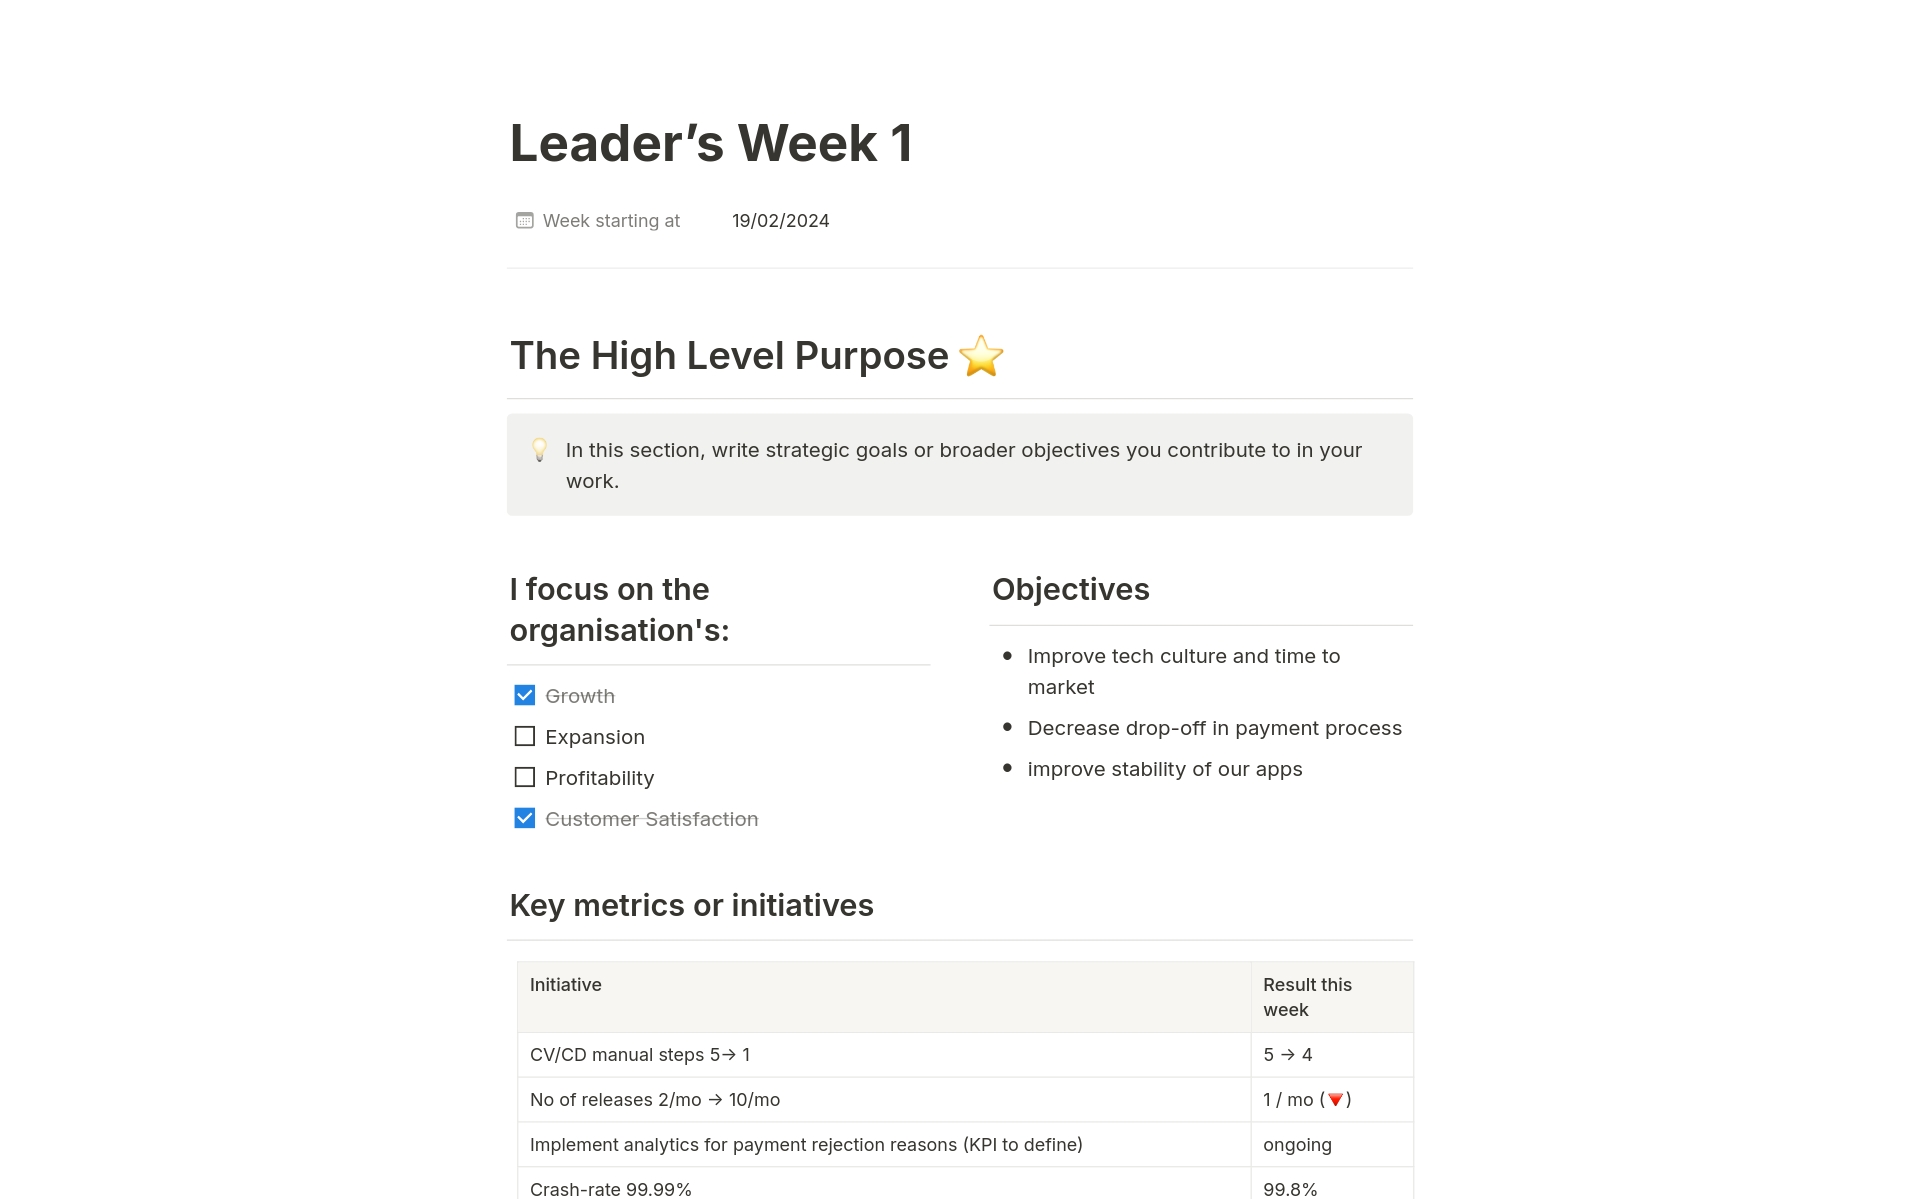 Engineering Leader’s Week - How to Maximize Your Weekly Impact